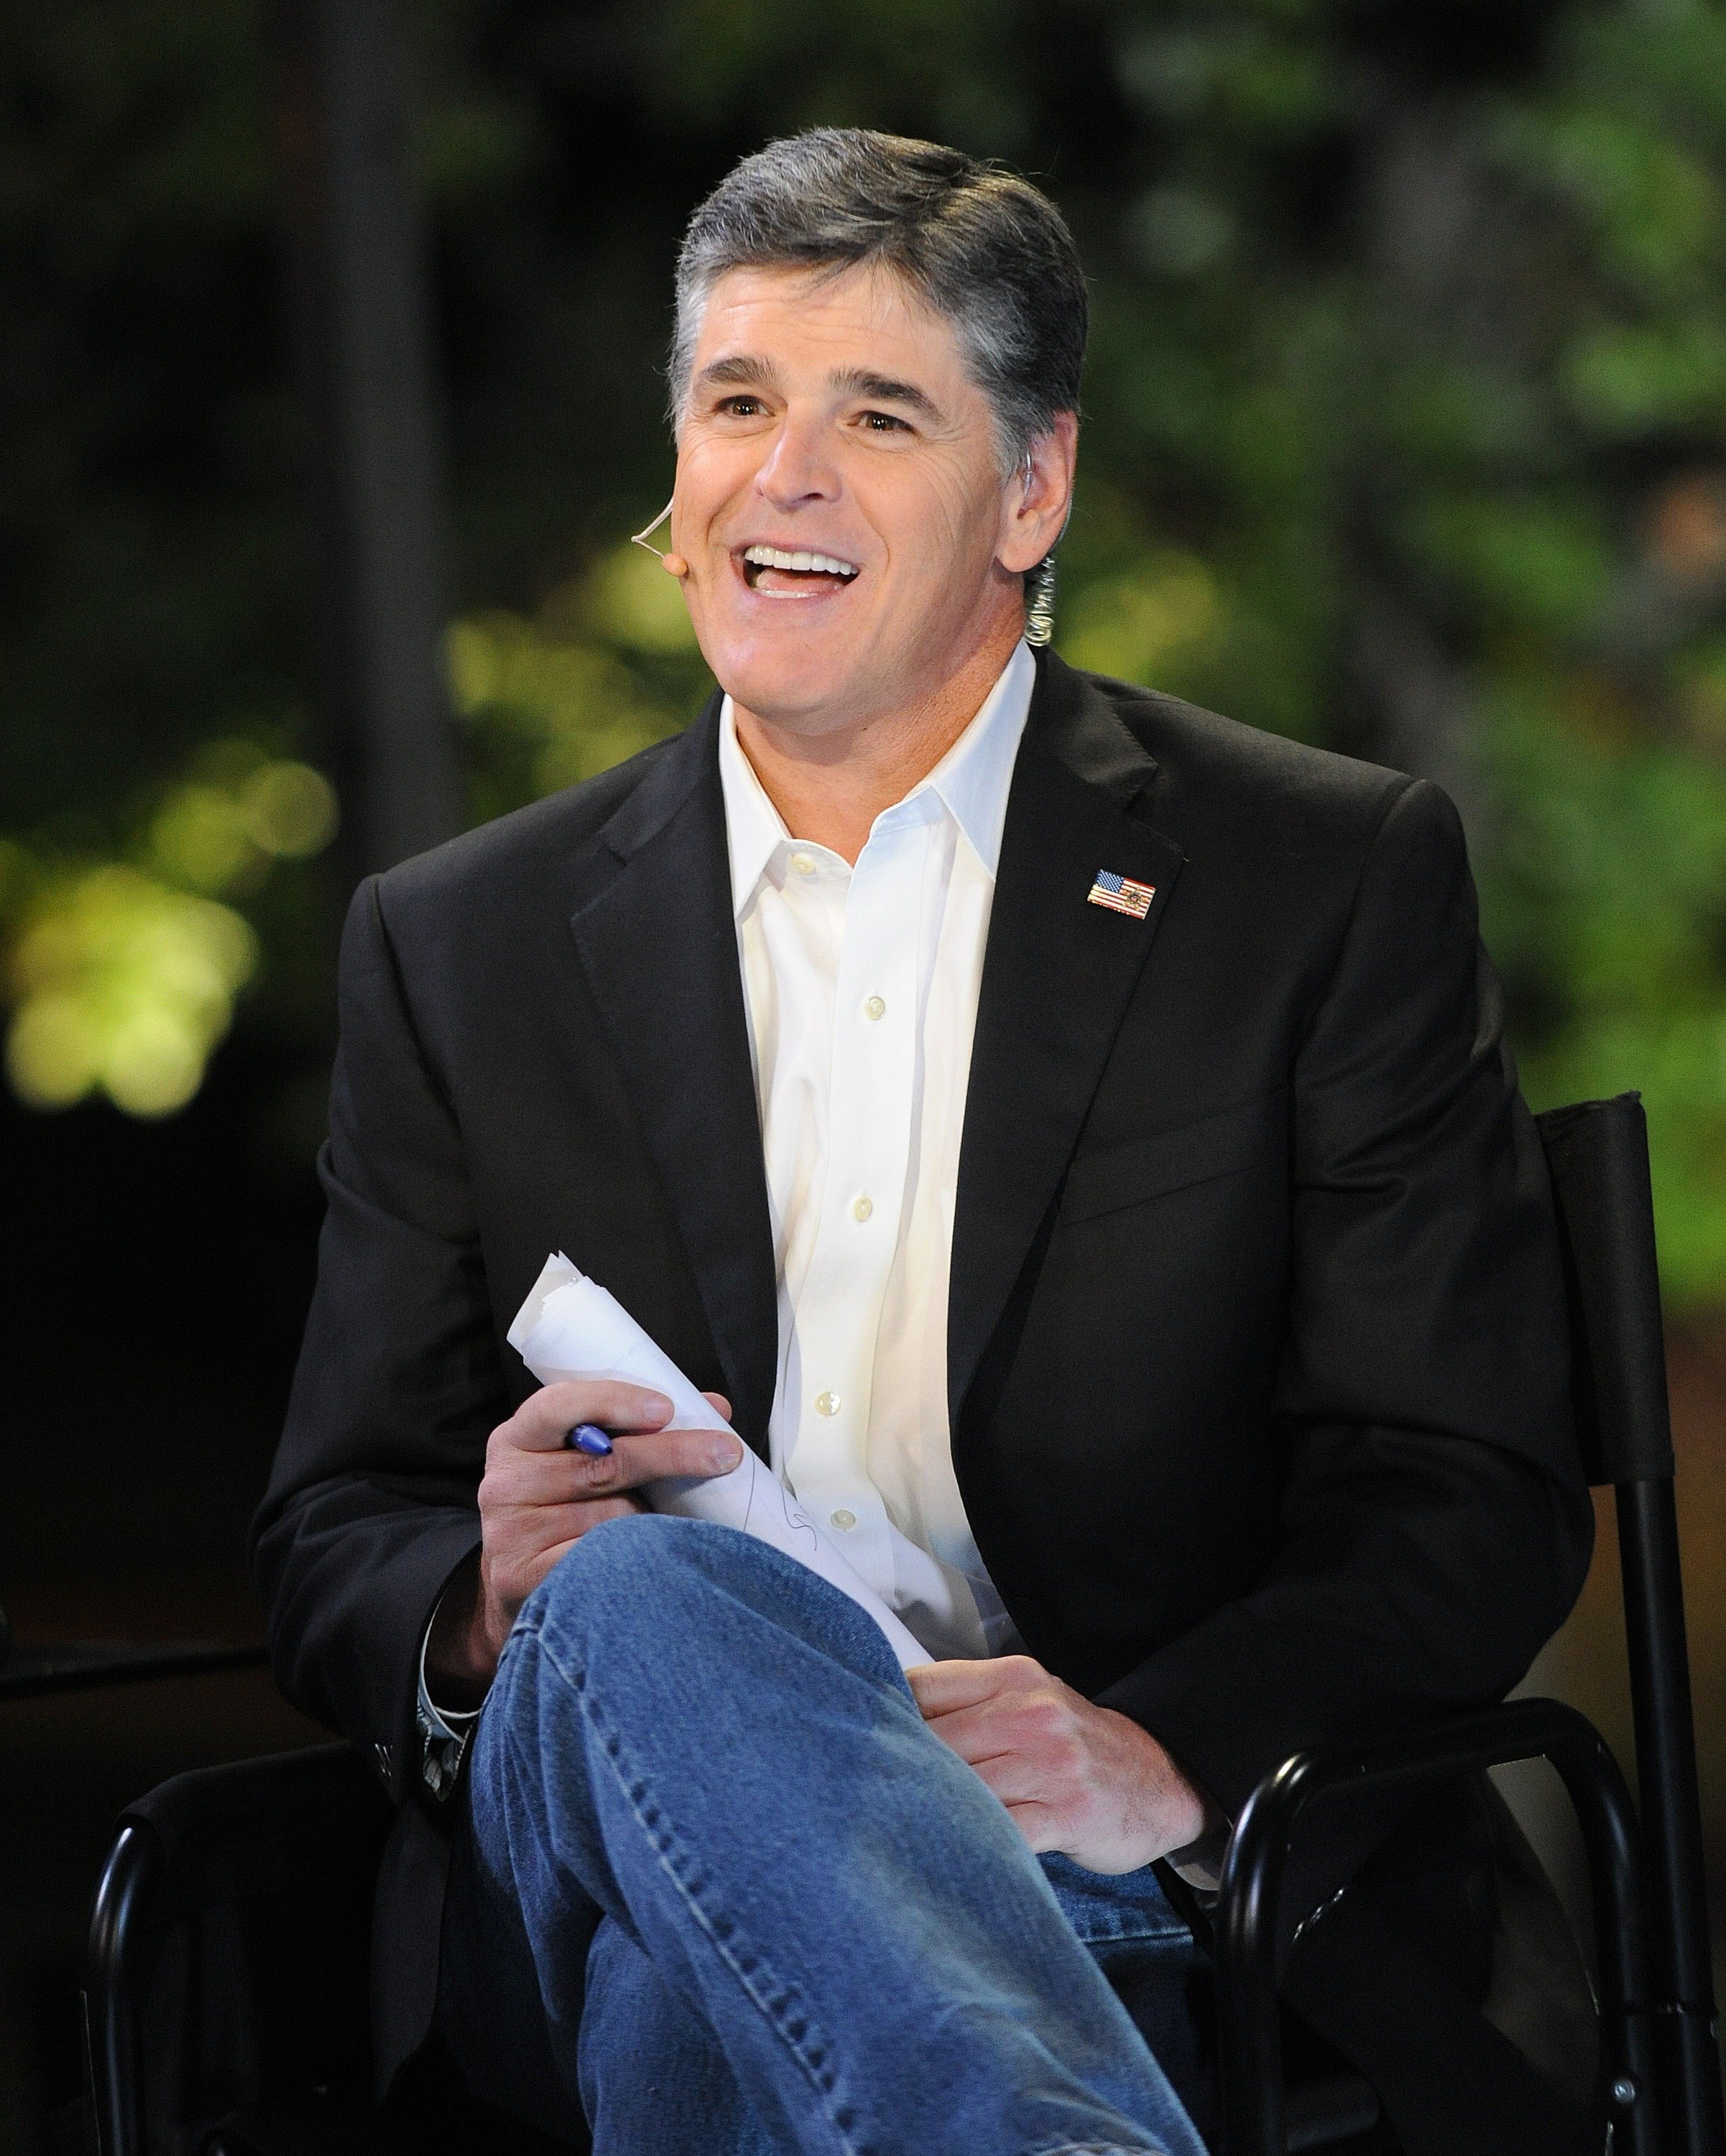 Sean Hannity on the set of the "Hannity with Sean Hannity" 15th anniversary show on October 6, 2011 | Source: Getty Images